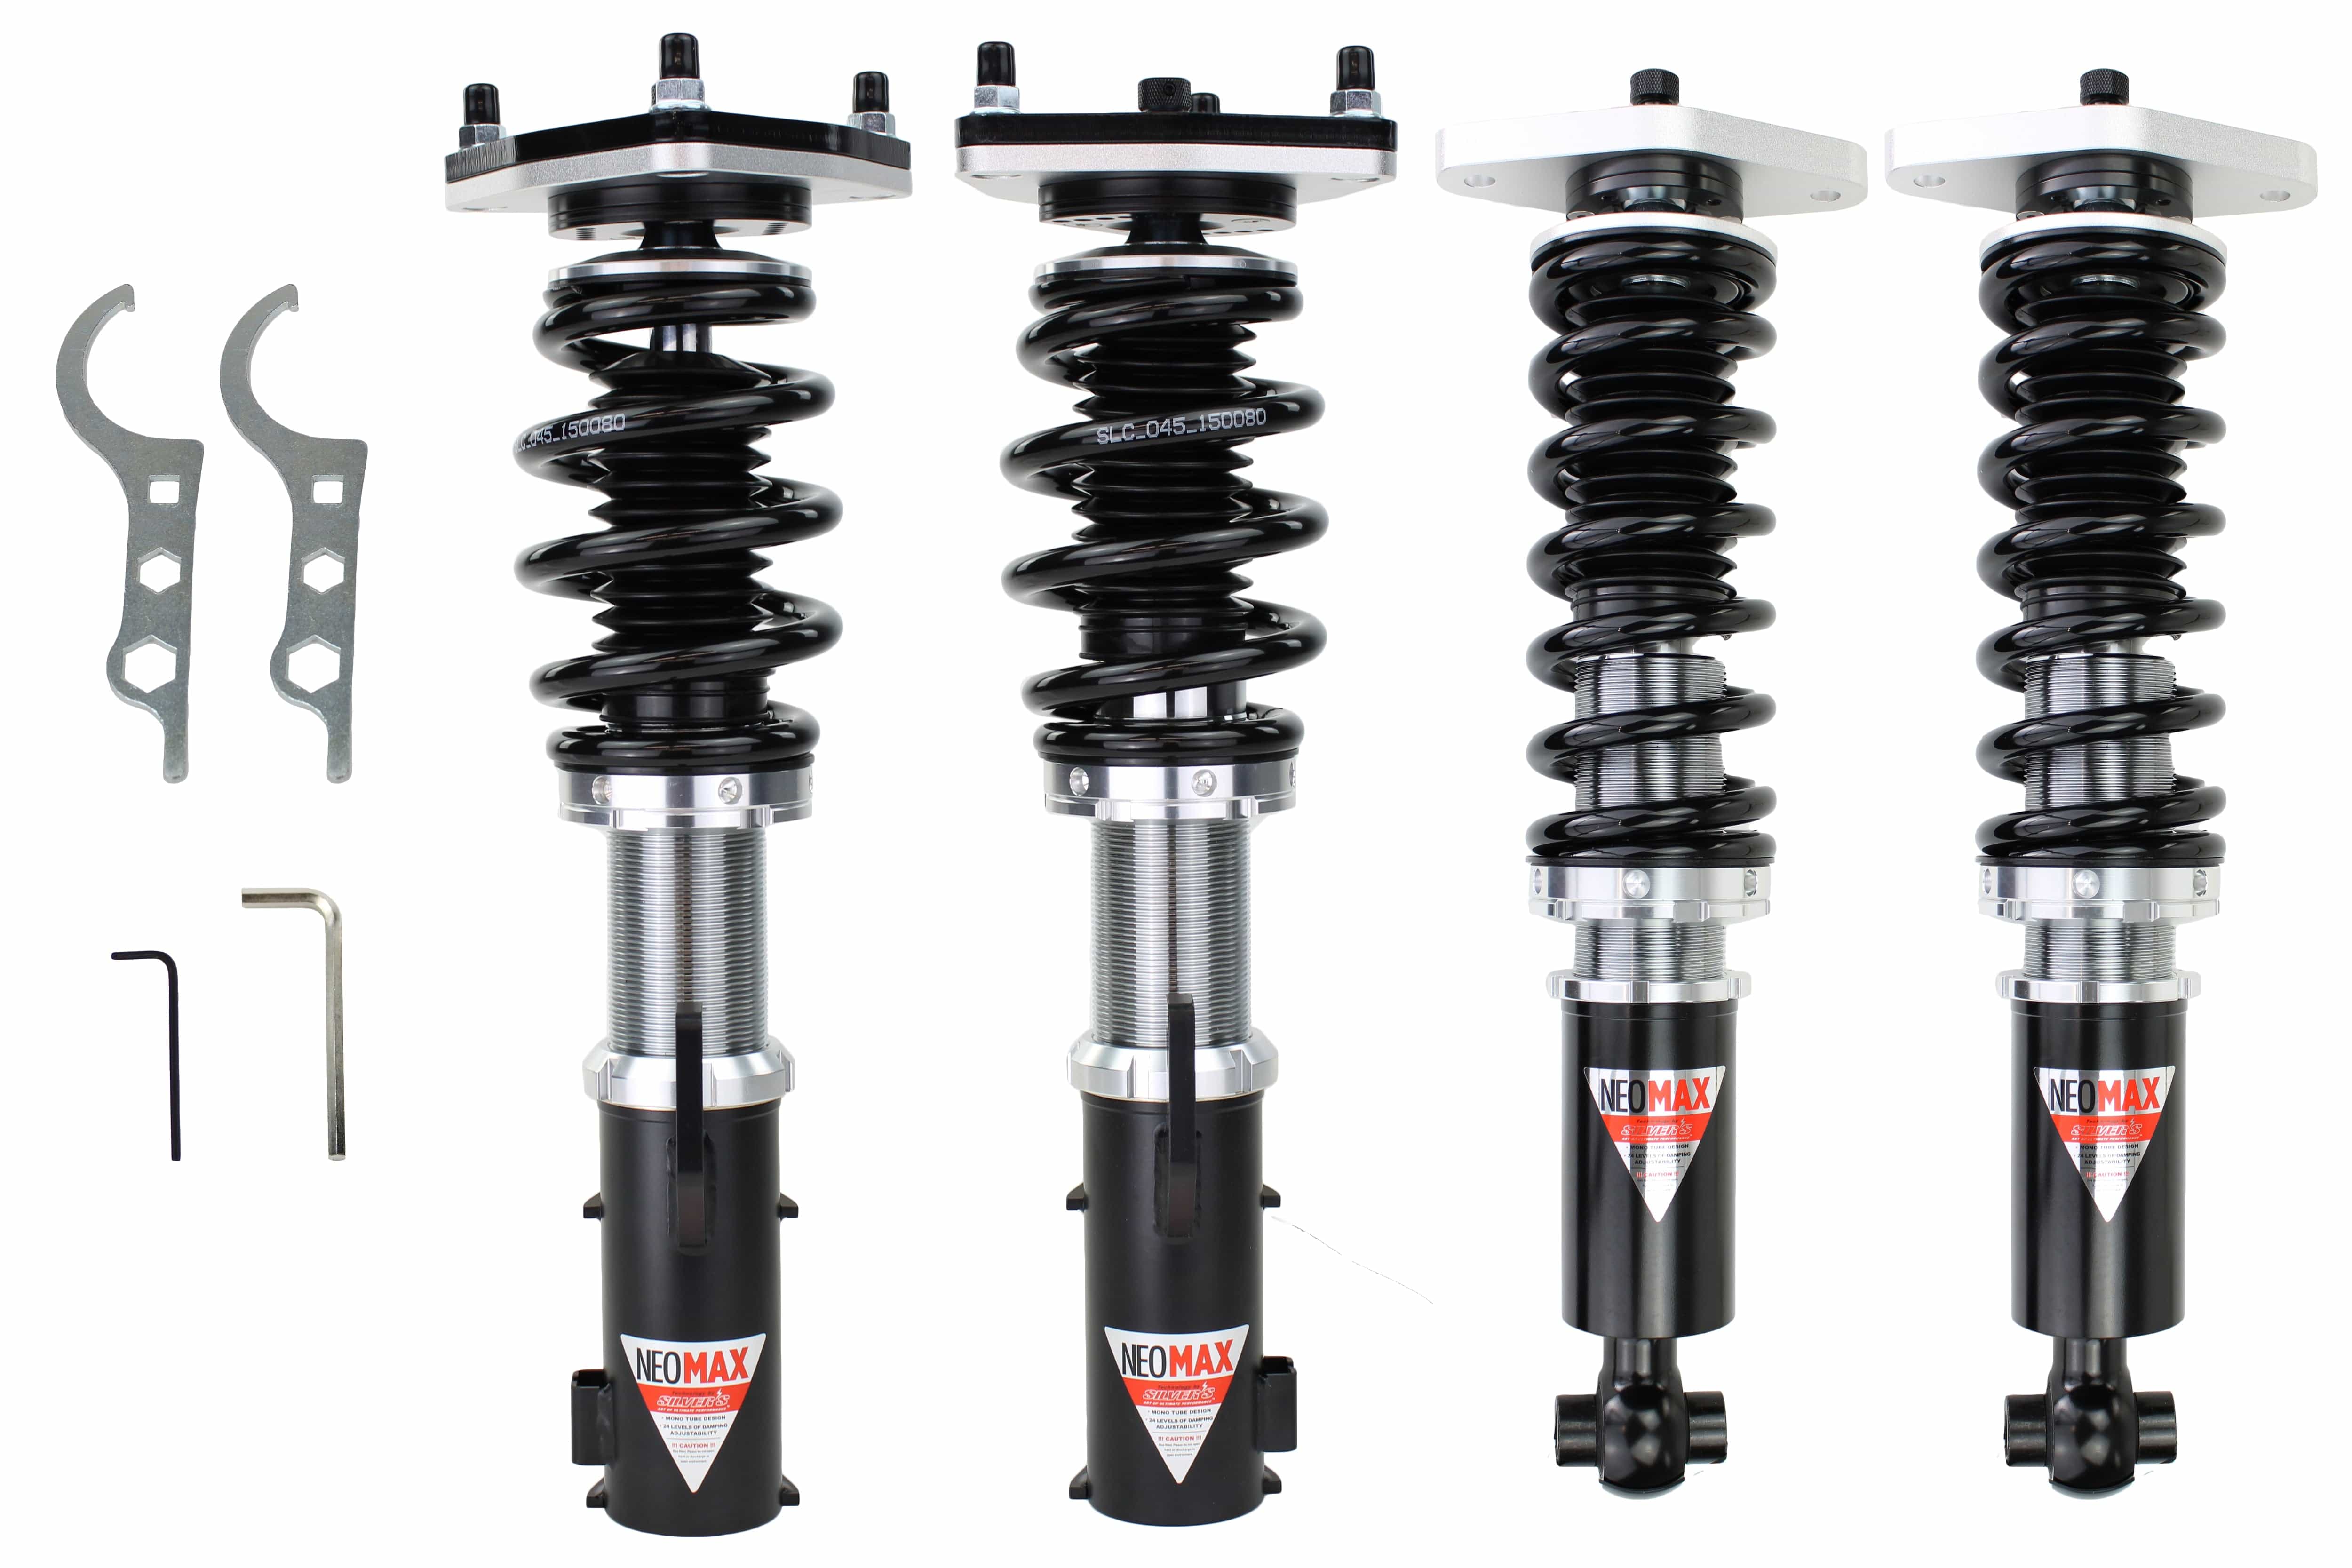 Silvers NEOMAX Coilovers (True Rear) for 2013-2016 Hyundai Genesis Coupe (Gen 2)